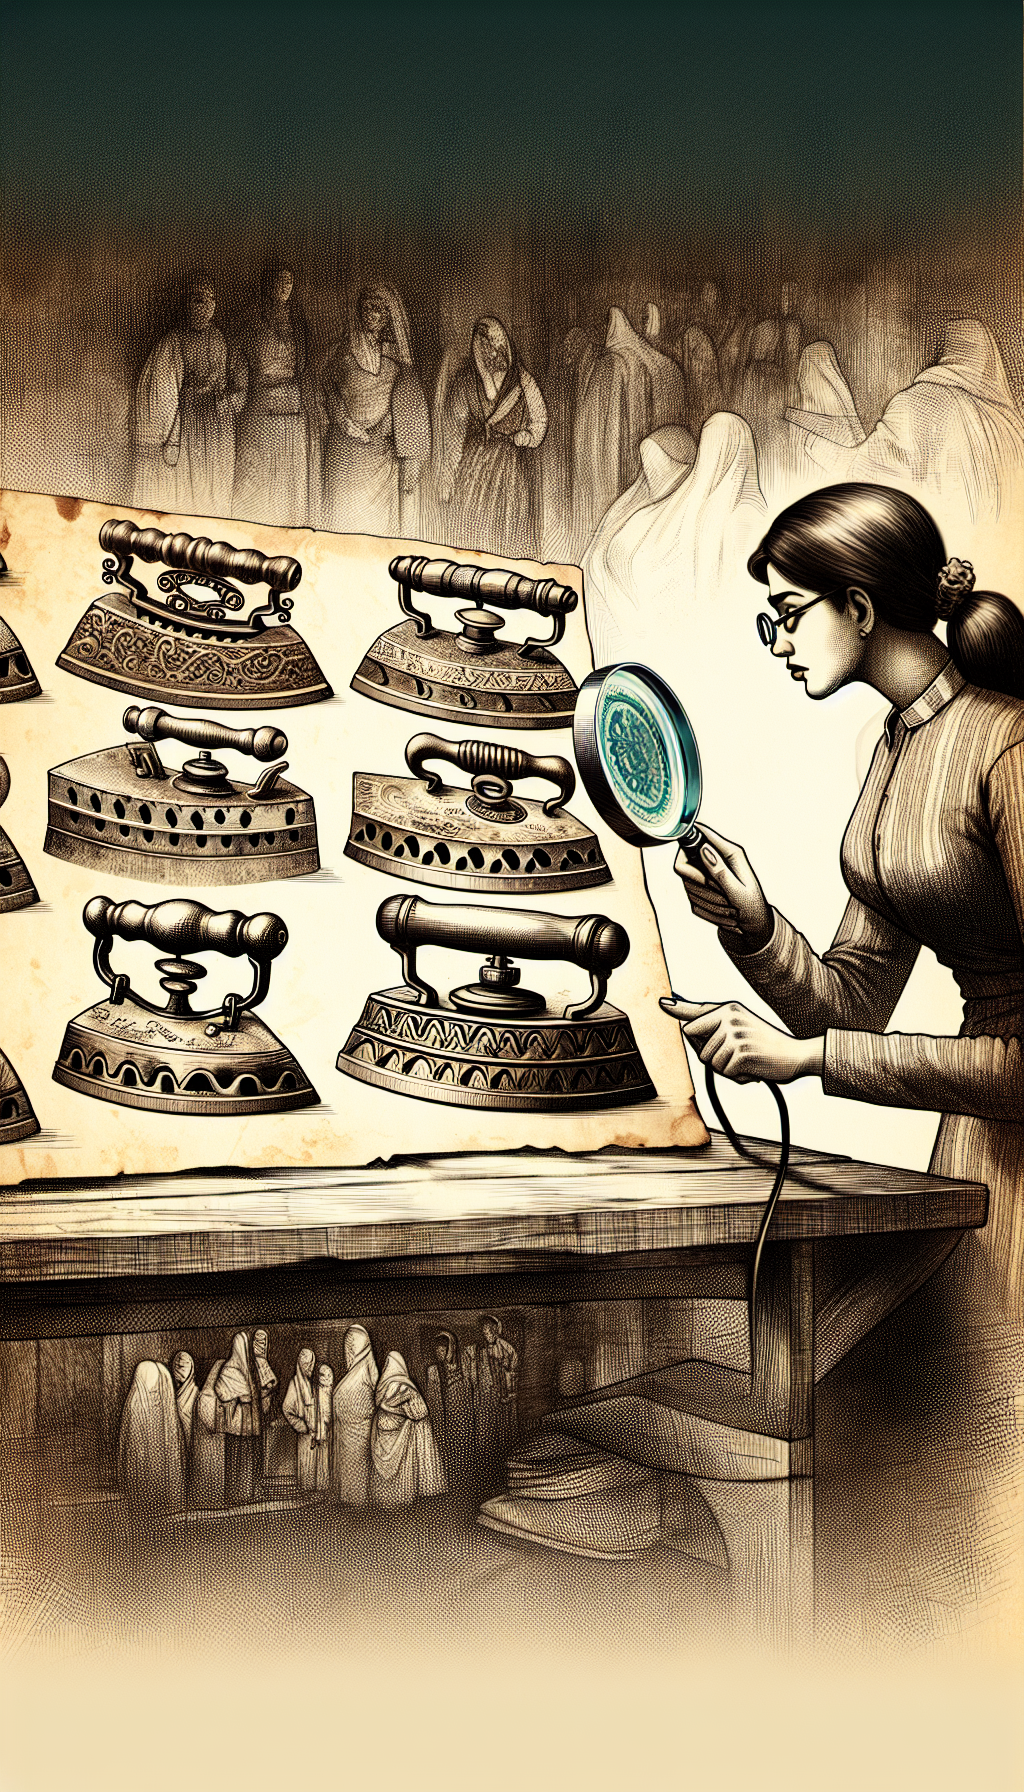 A whimsical sketch depicts a detective peering through a magnifying glass at a lineup of assorted antique sad irons, each with unique patterns and markings. The magnifying glass reveals a ghostly overlay of historical scenes relevant to each iron's era, suggesting the stories and history encapsulated within these ancient domestic tools.